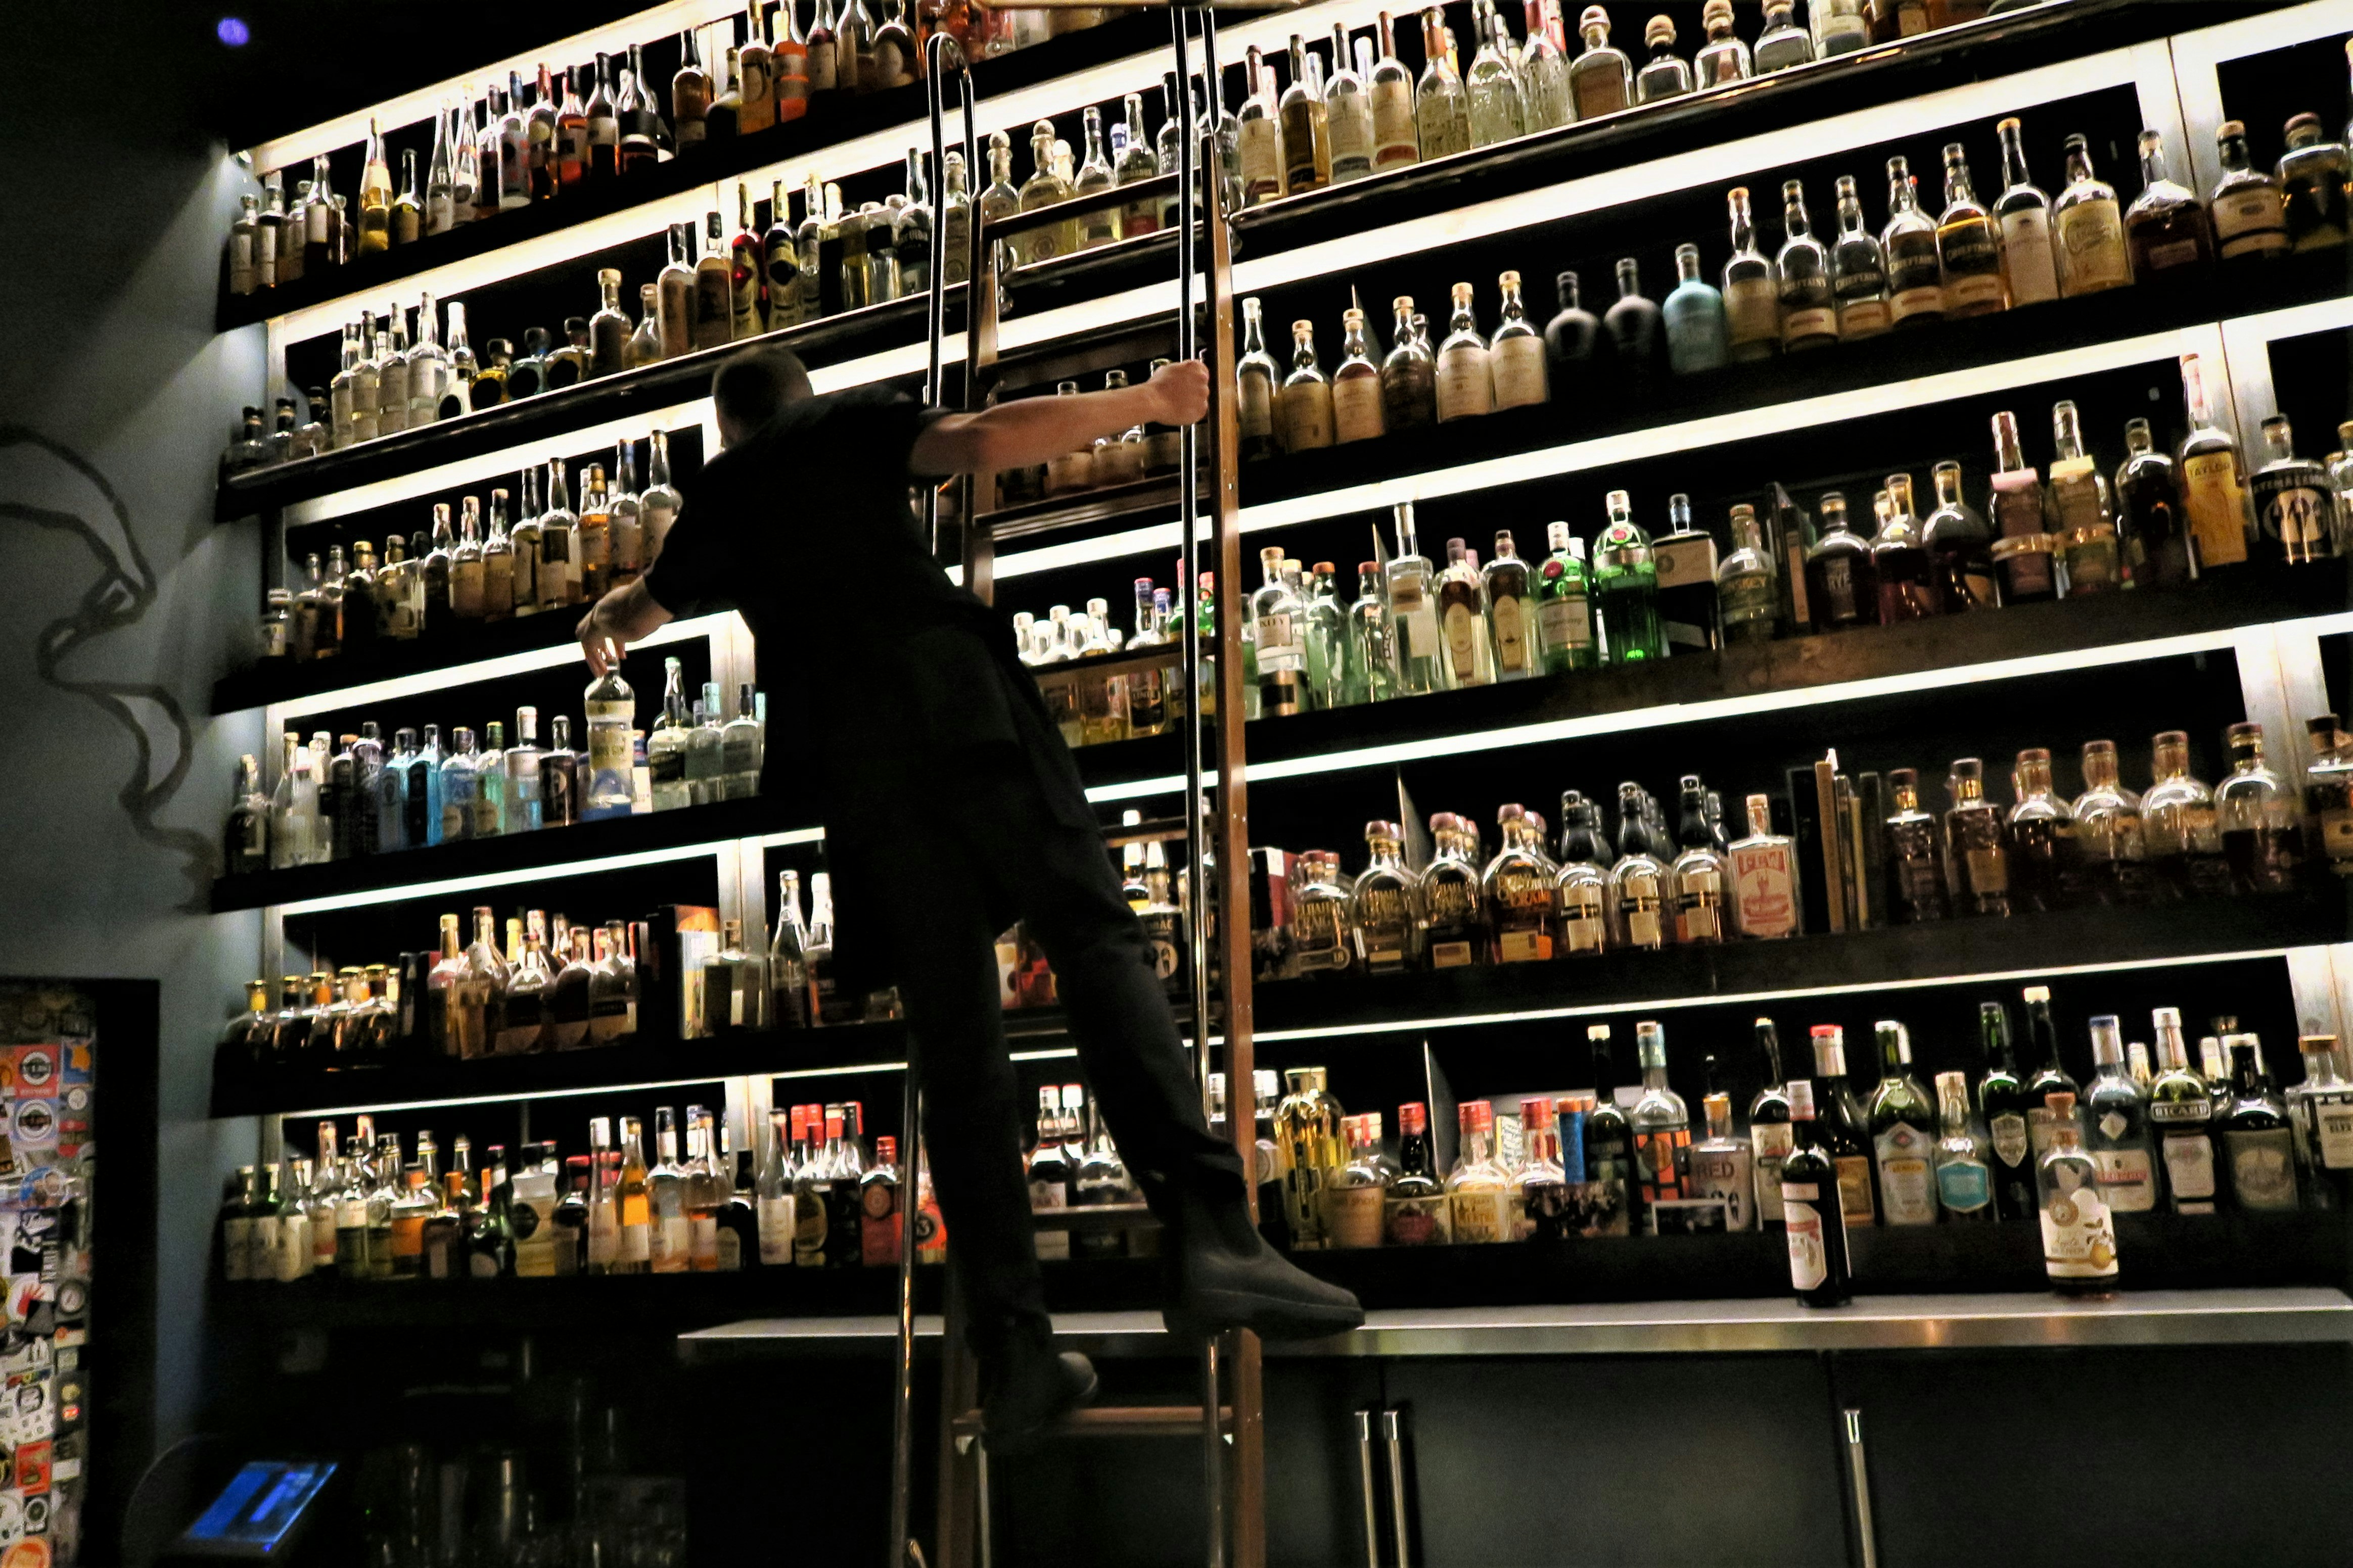 A bartender dressed in black holds on to the side of a ladder while reaching for a bottle of spirits from a multi-level shelf filled with bottles